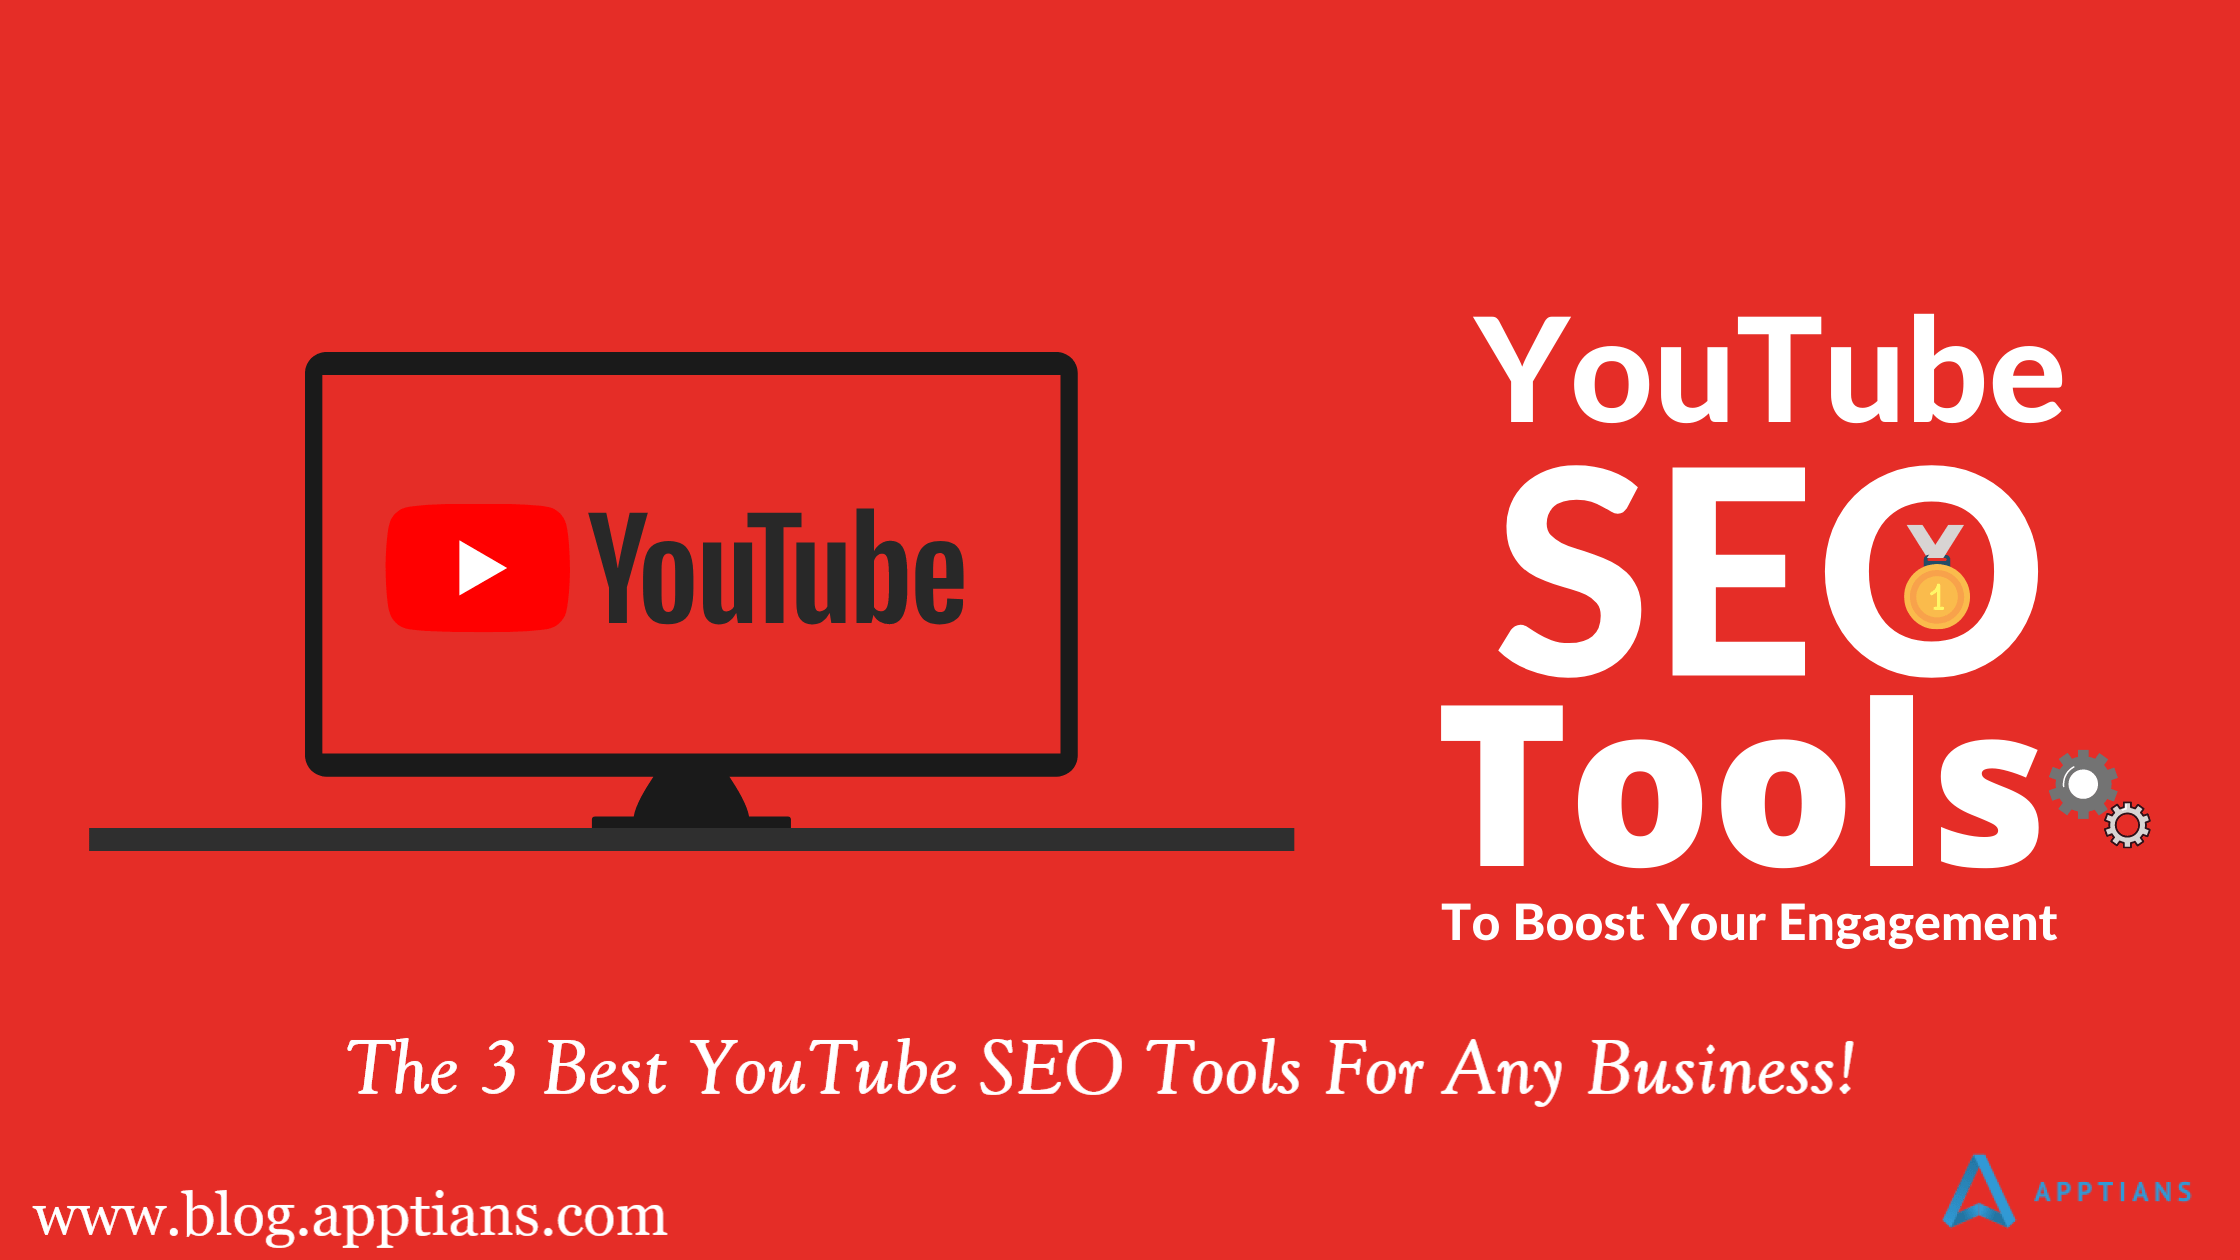 The 3 Best YouTube SEO Tools For Any Business